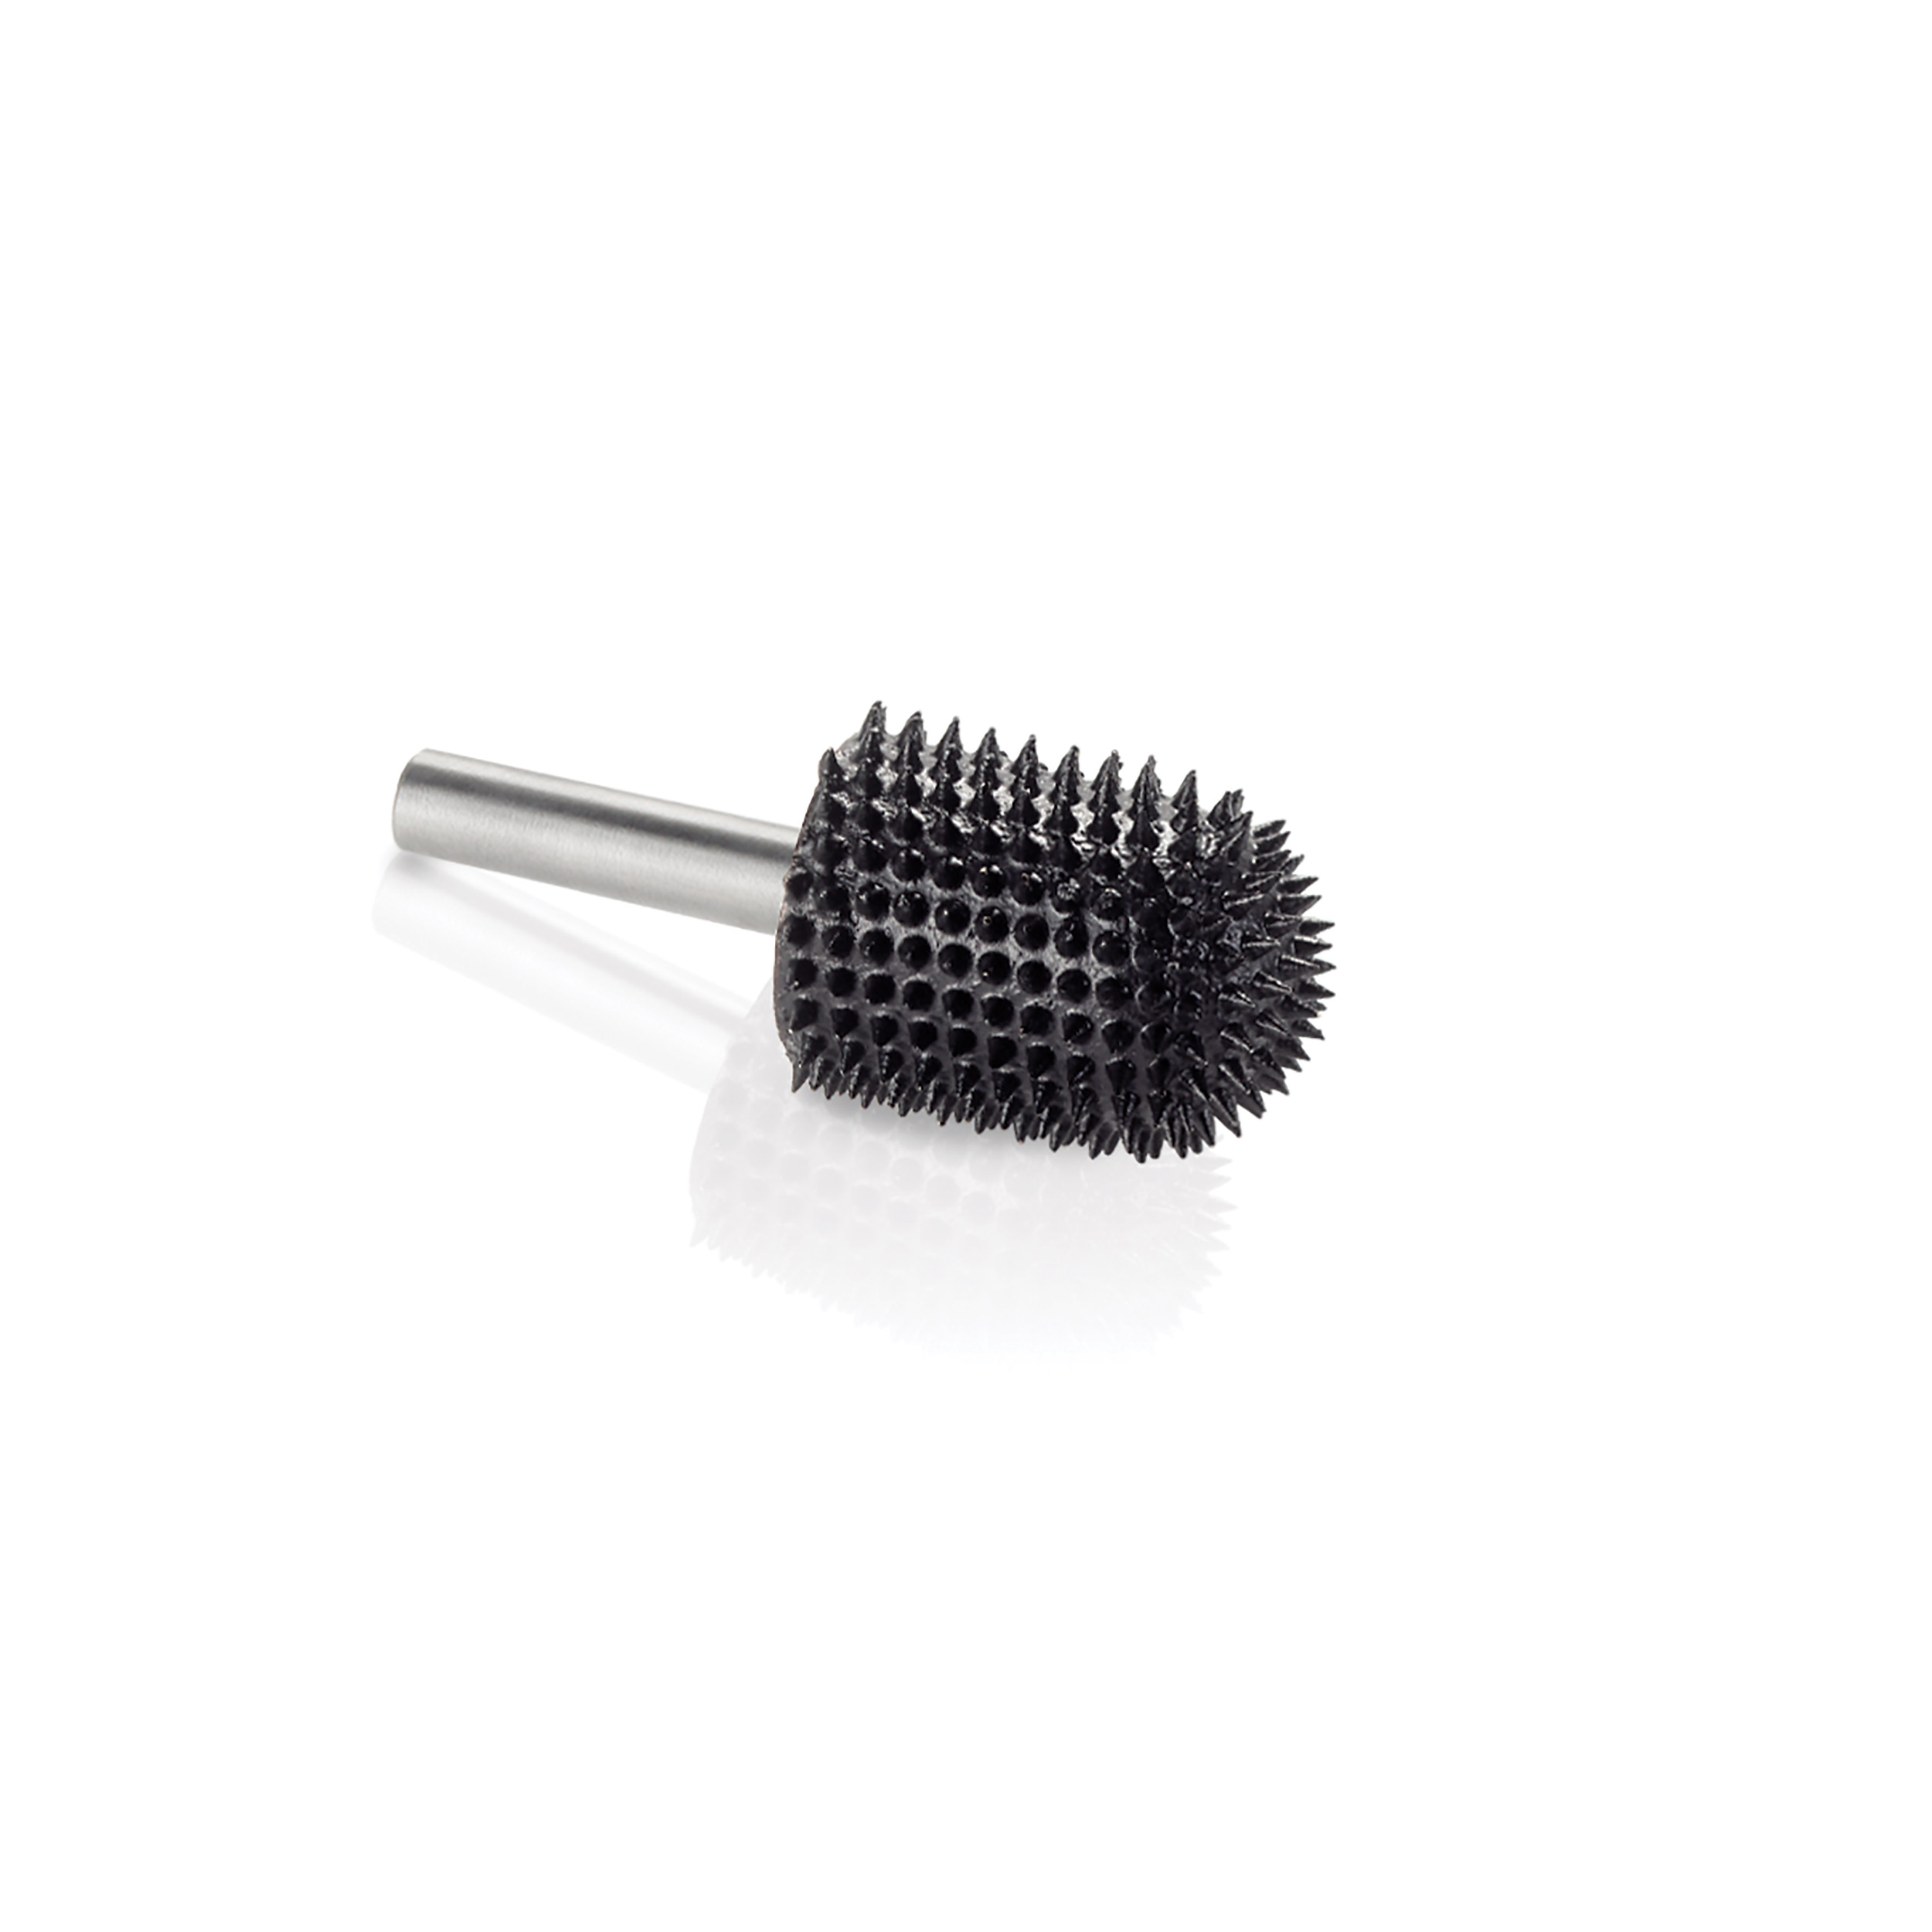 Extreme Ball Nose Burr, 1/4" Shaft, Very Coarse (3/4" X 1-1/8")